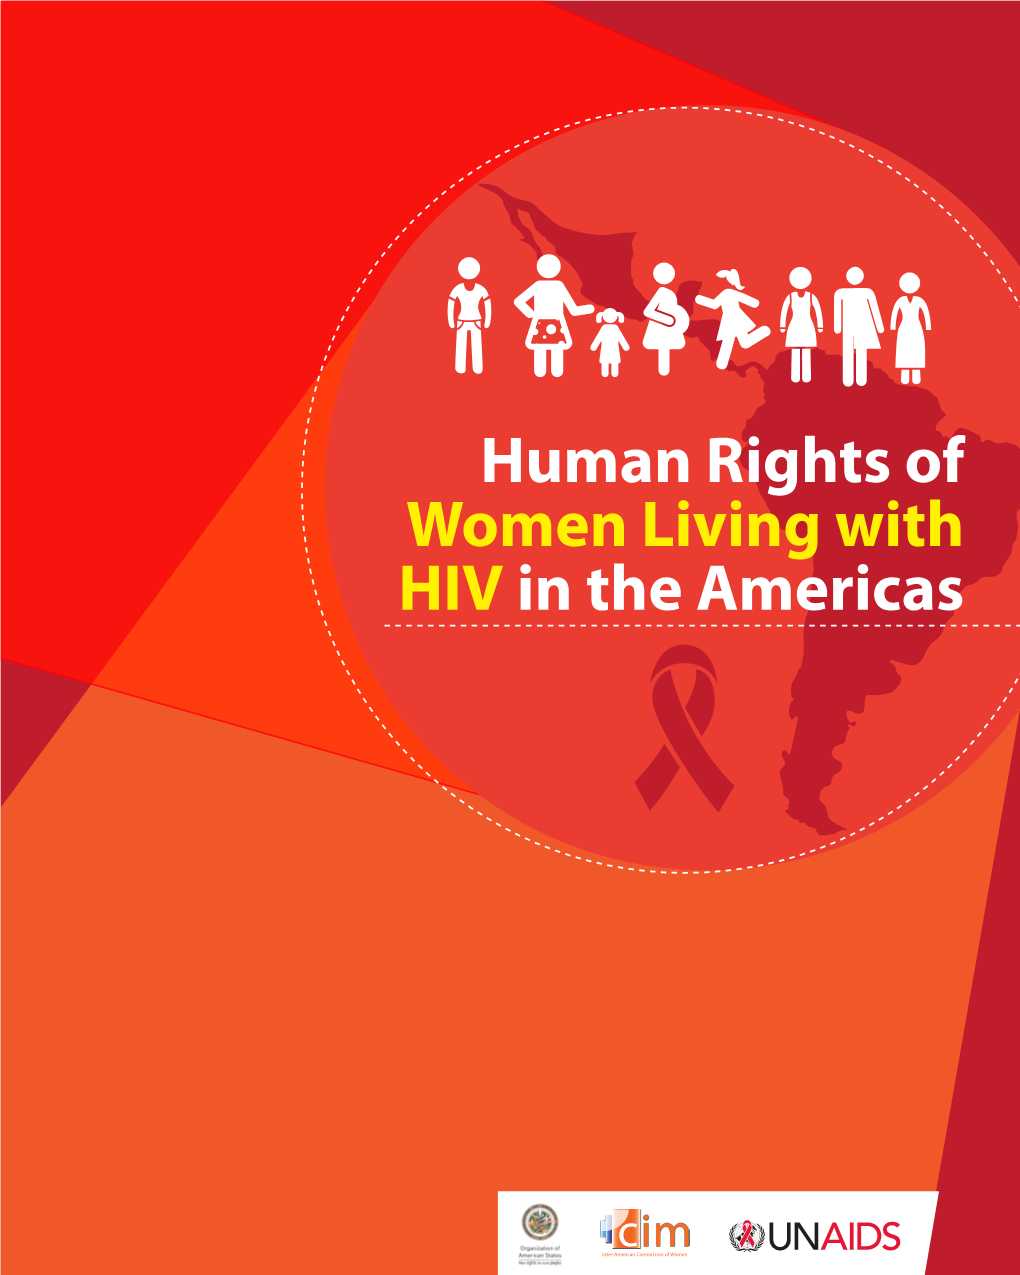 Human Rights of Women Living with HIV in the Americas